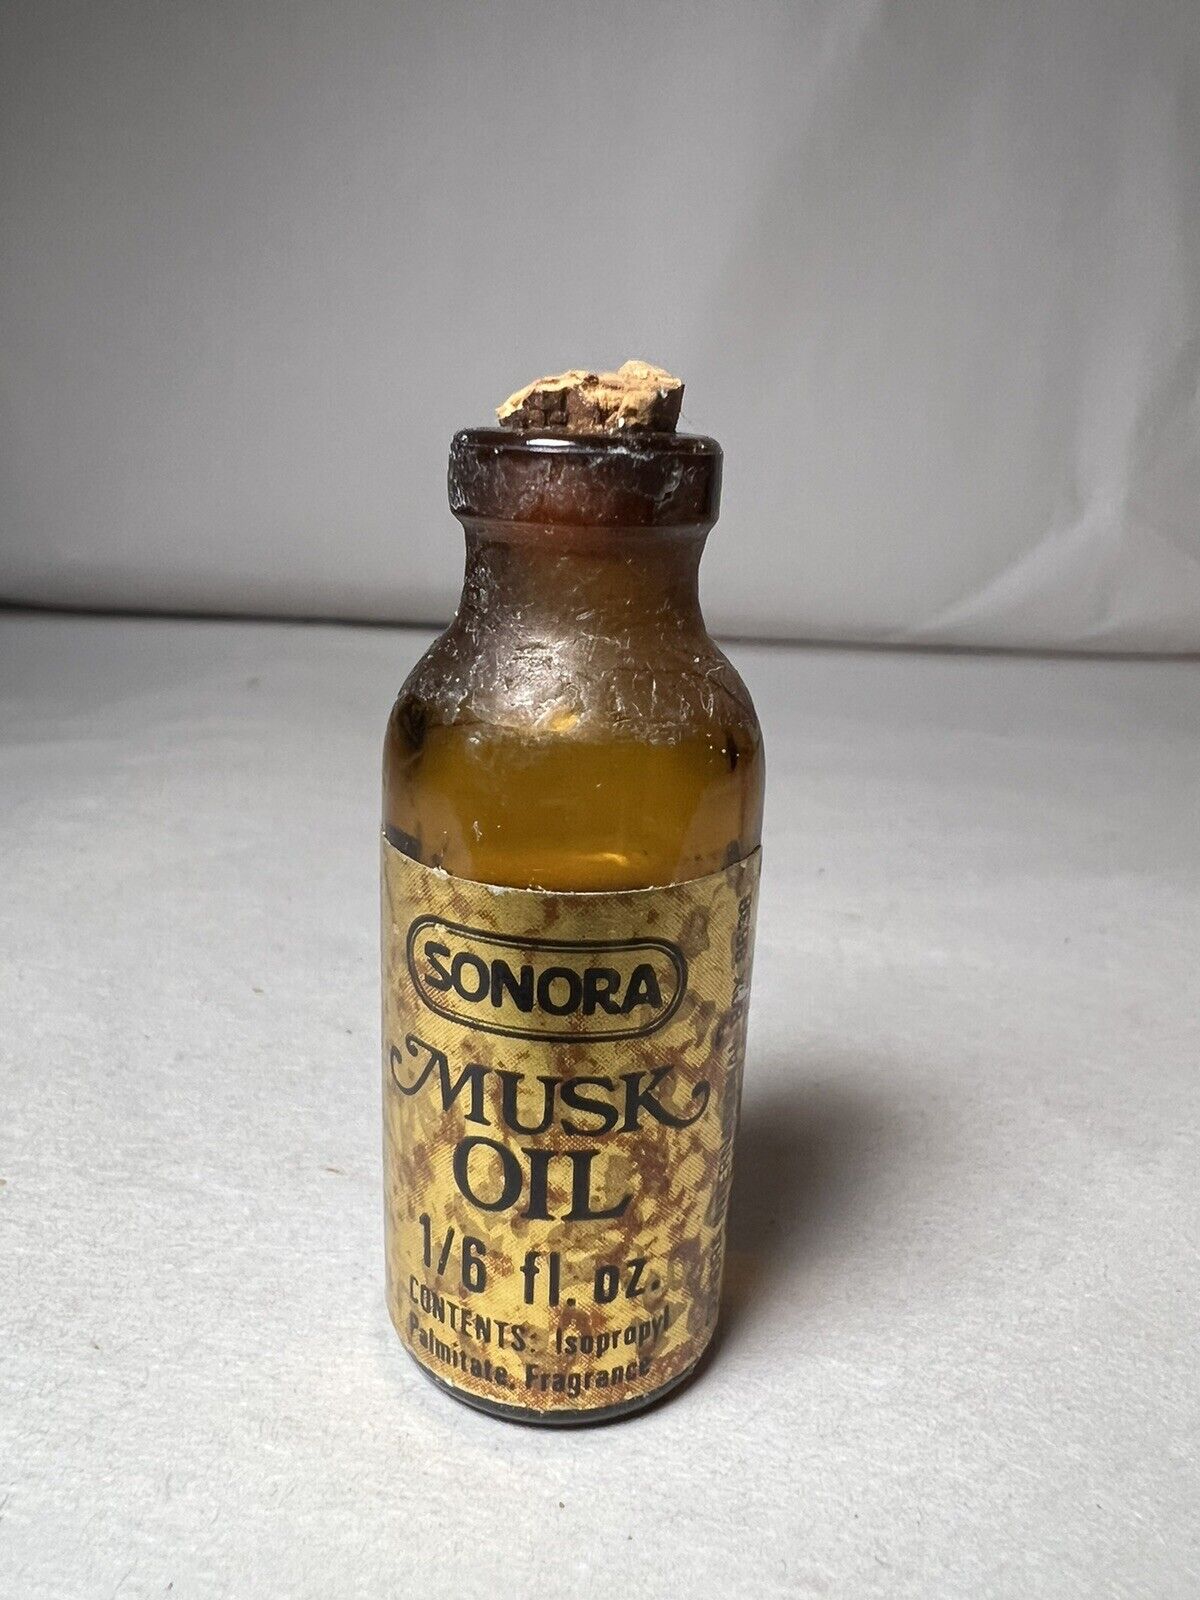 VINTAGE Sonora Musk Oil 1/6 fl oz/5 ml 2/3 Full Original Corked Made in Canada